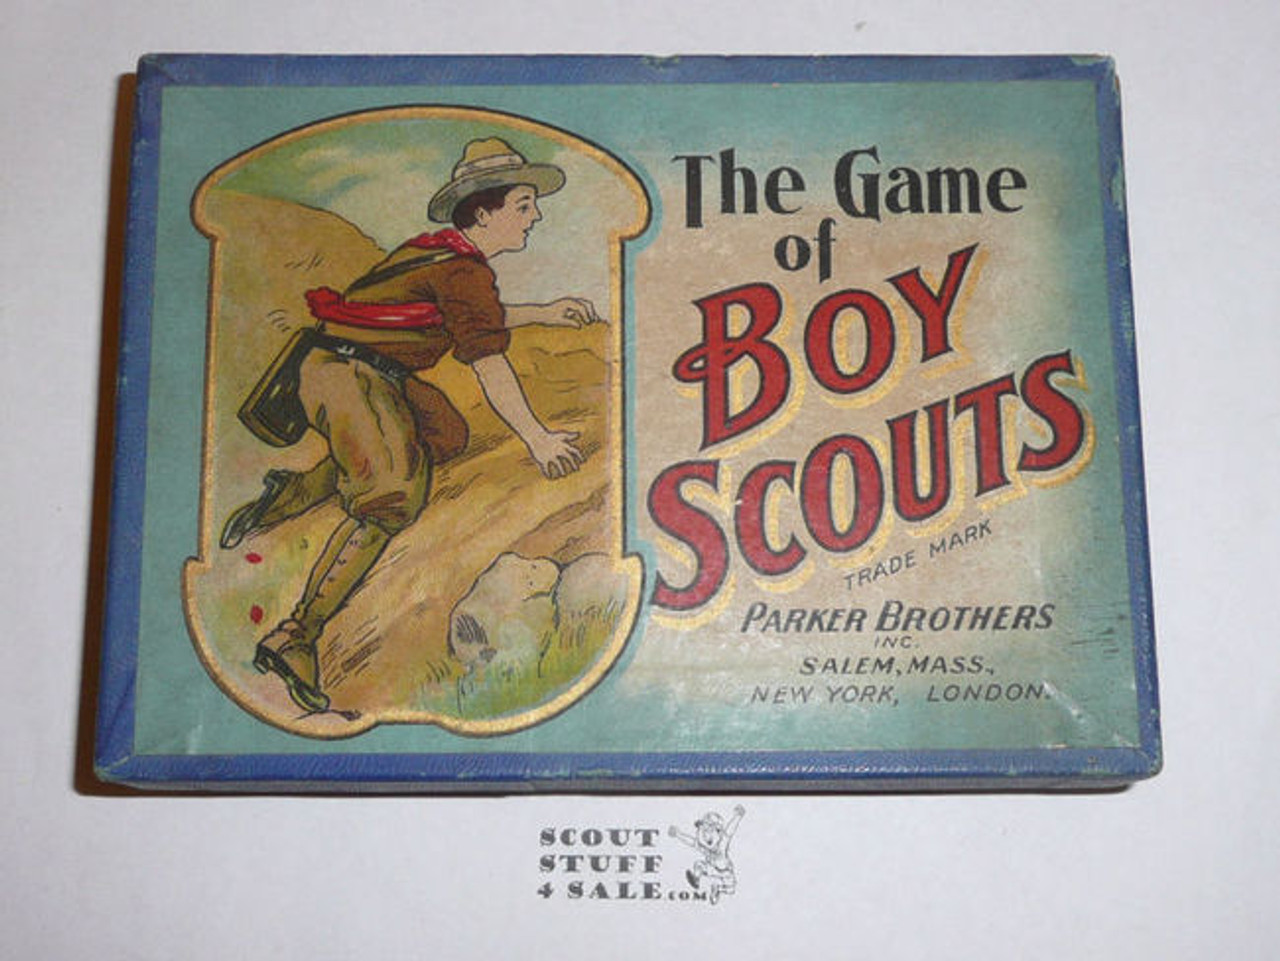 Vintage 1912 Parker Brothers, The Game of Boy Scouts Card Game, COMPLETE #4